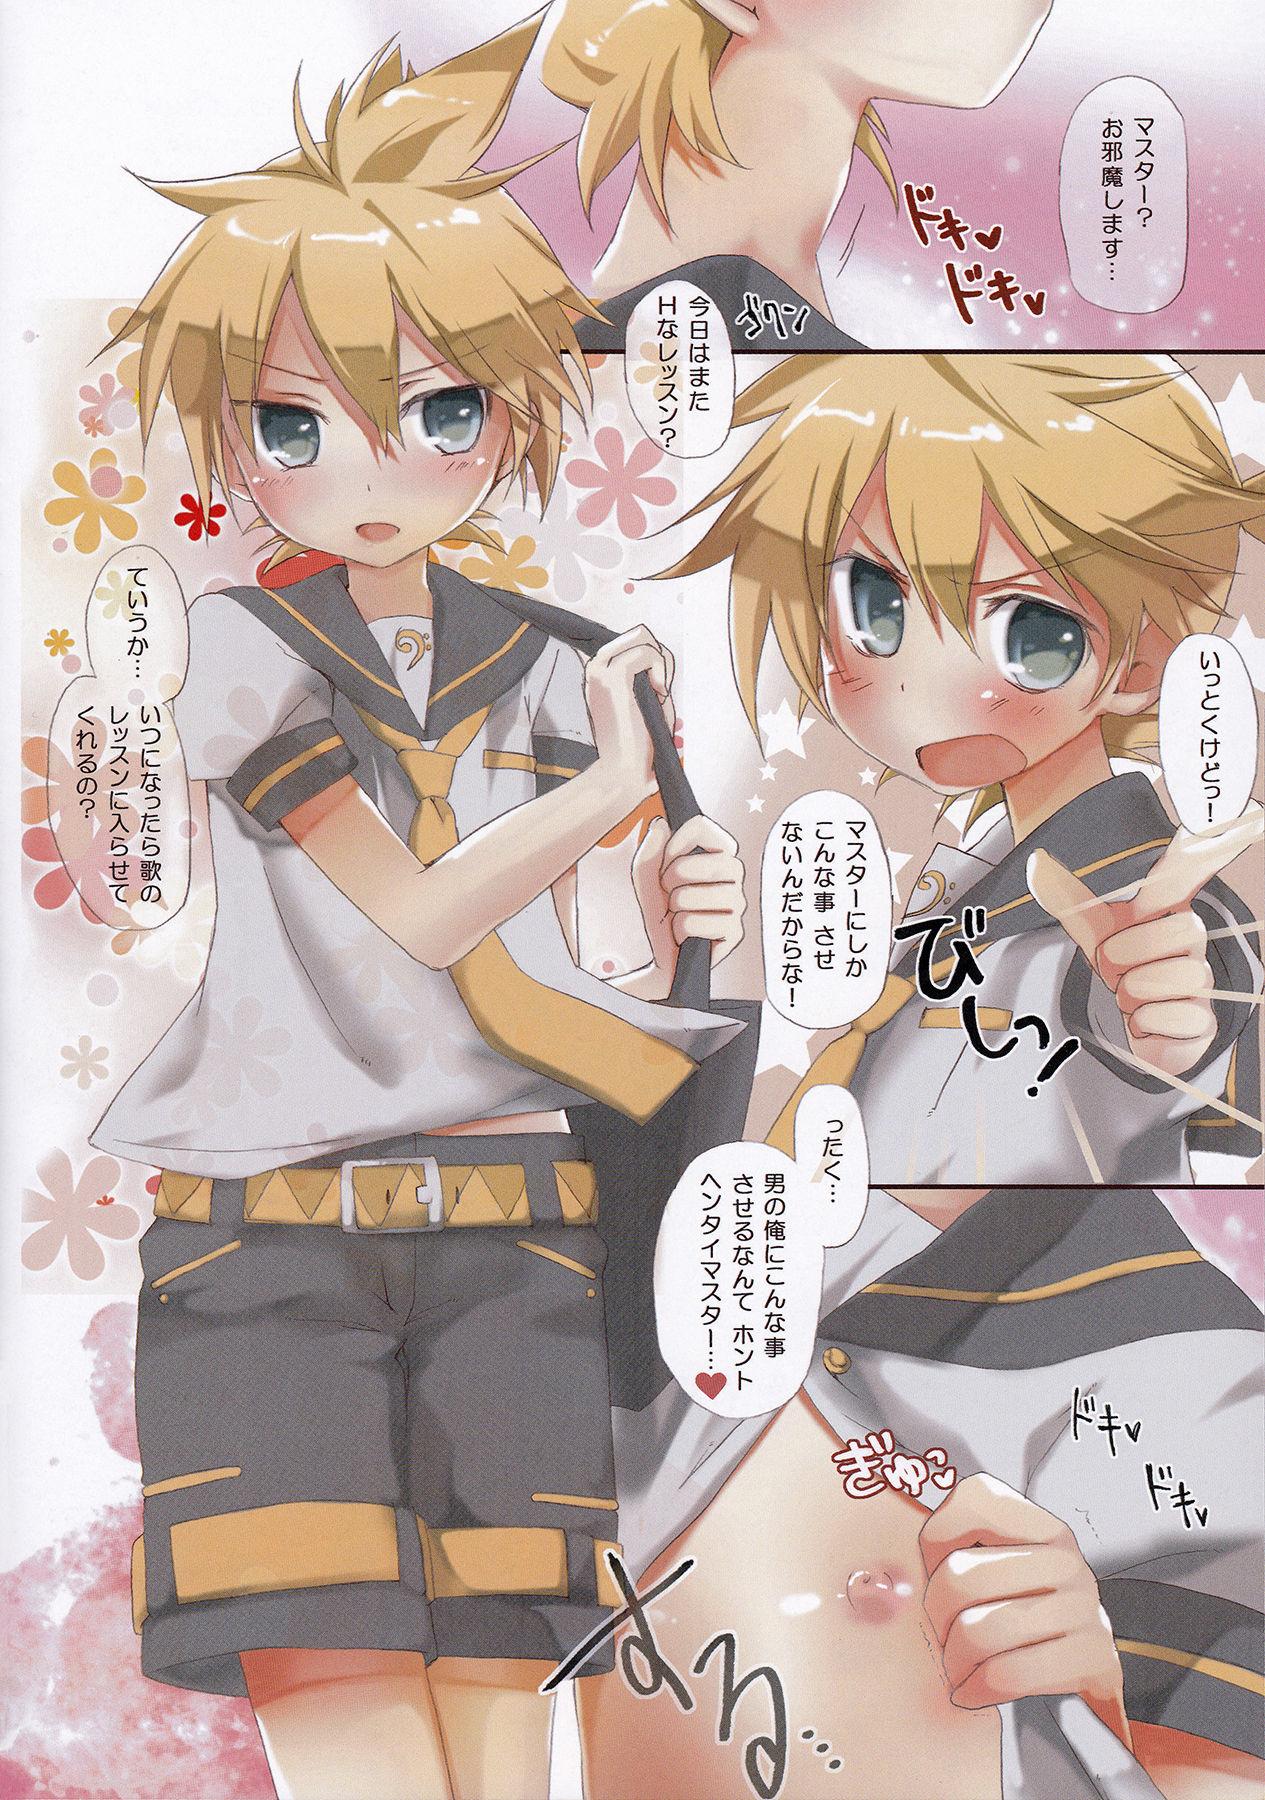 Sharing Ecchi Two - Vocaloid Extreme - Page 3